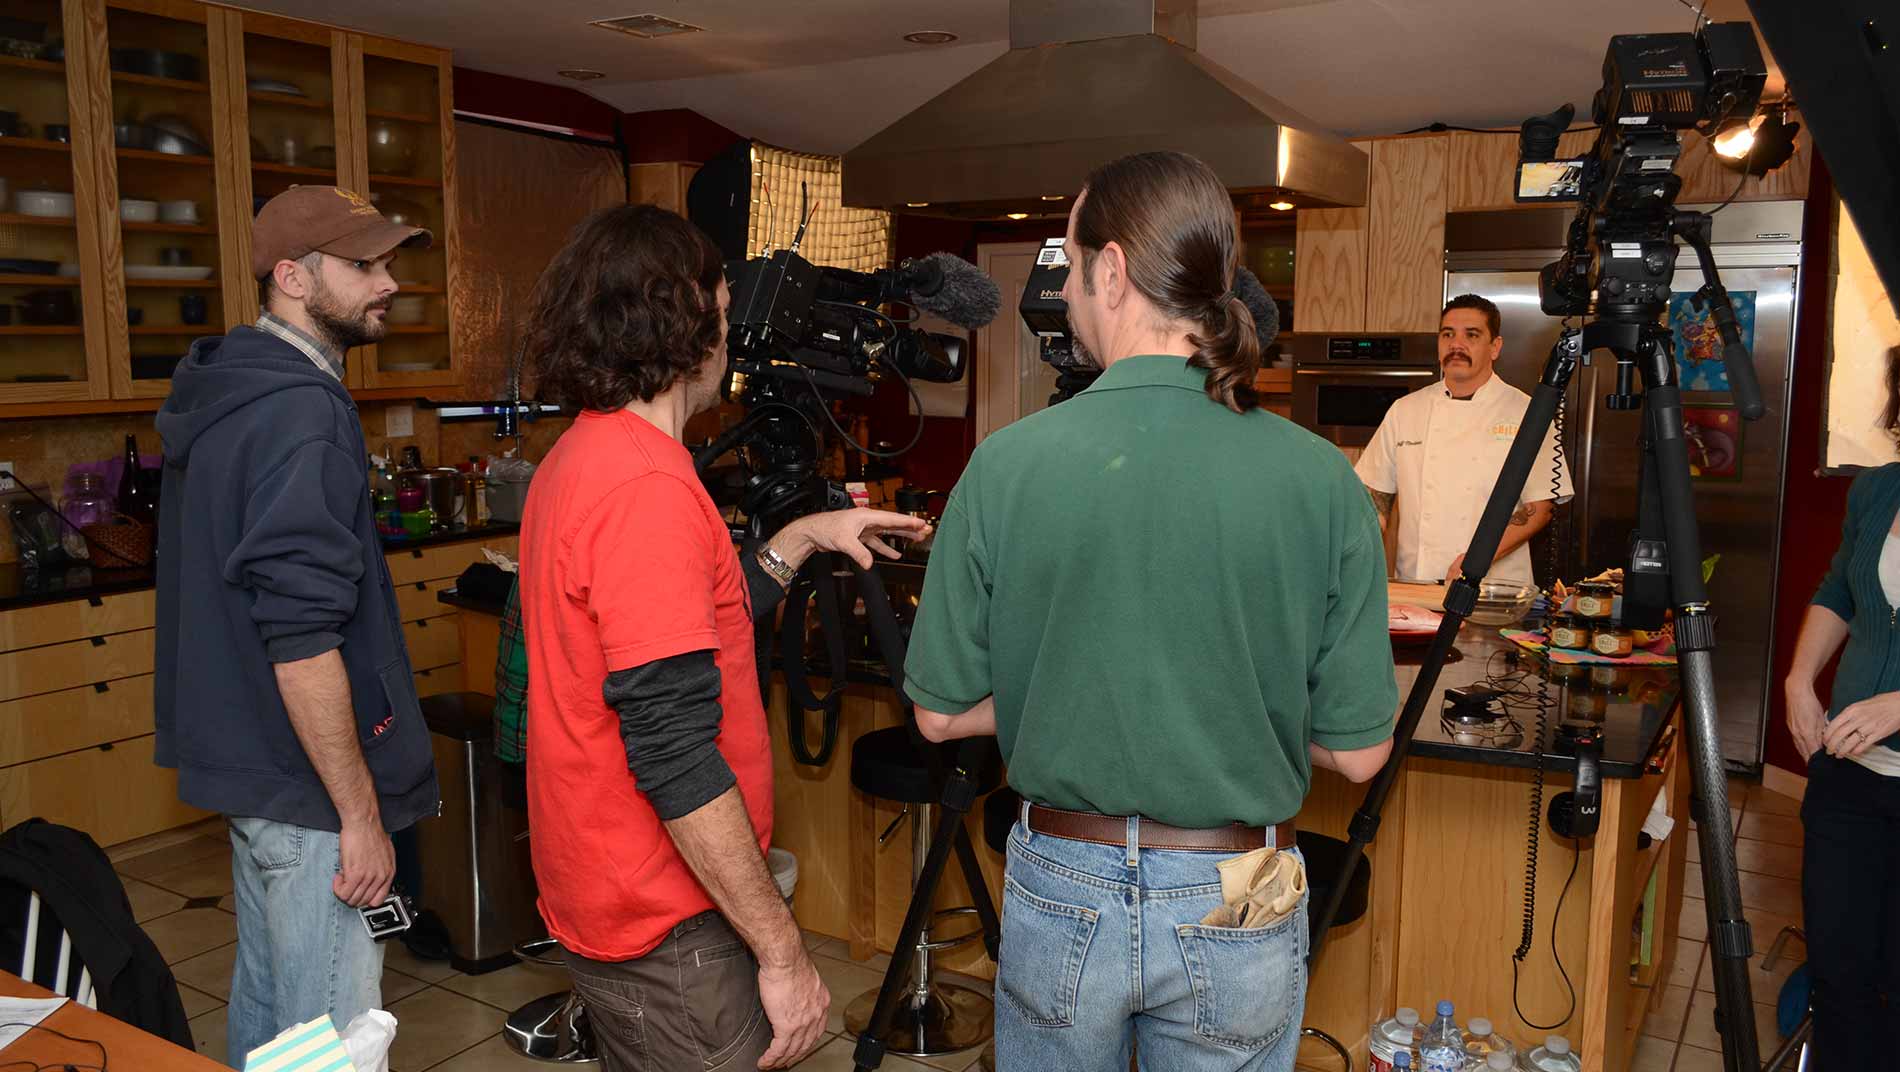 Kyle Banowsky, Abe Moore and Alan Fisher shoot a wild game cooking segment with chef Jeff Martinez.